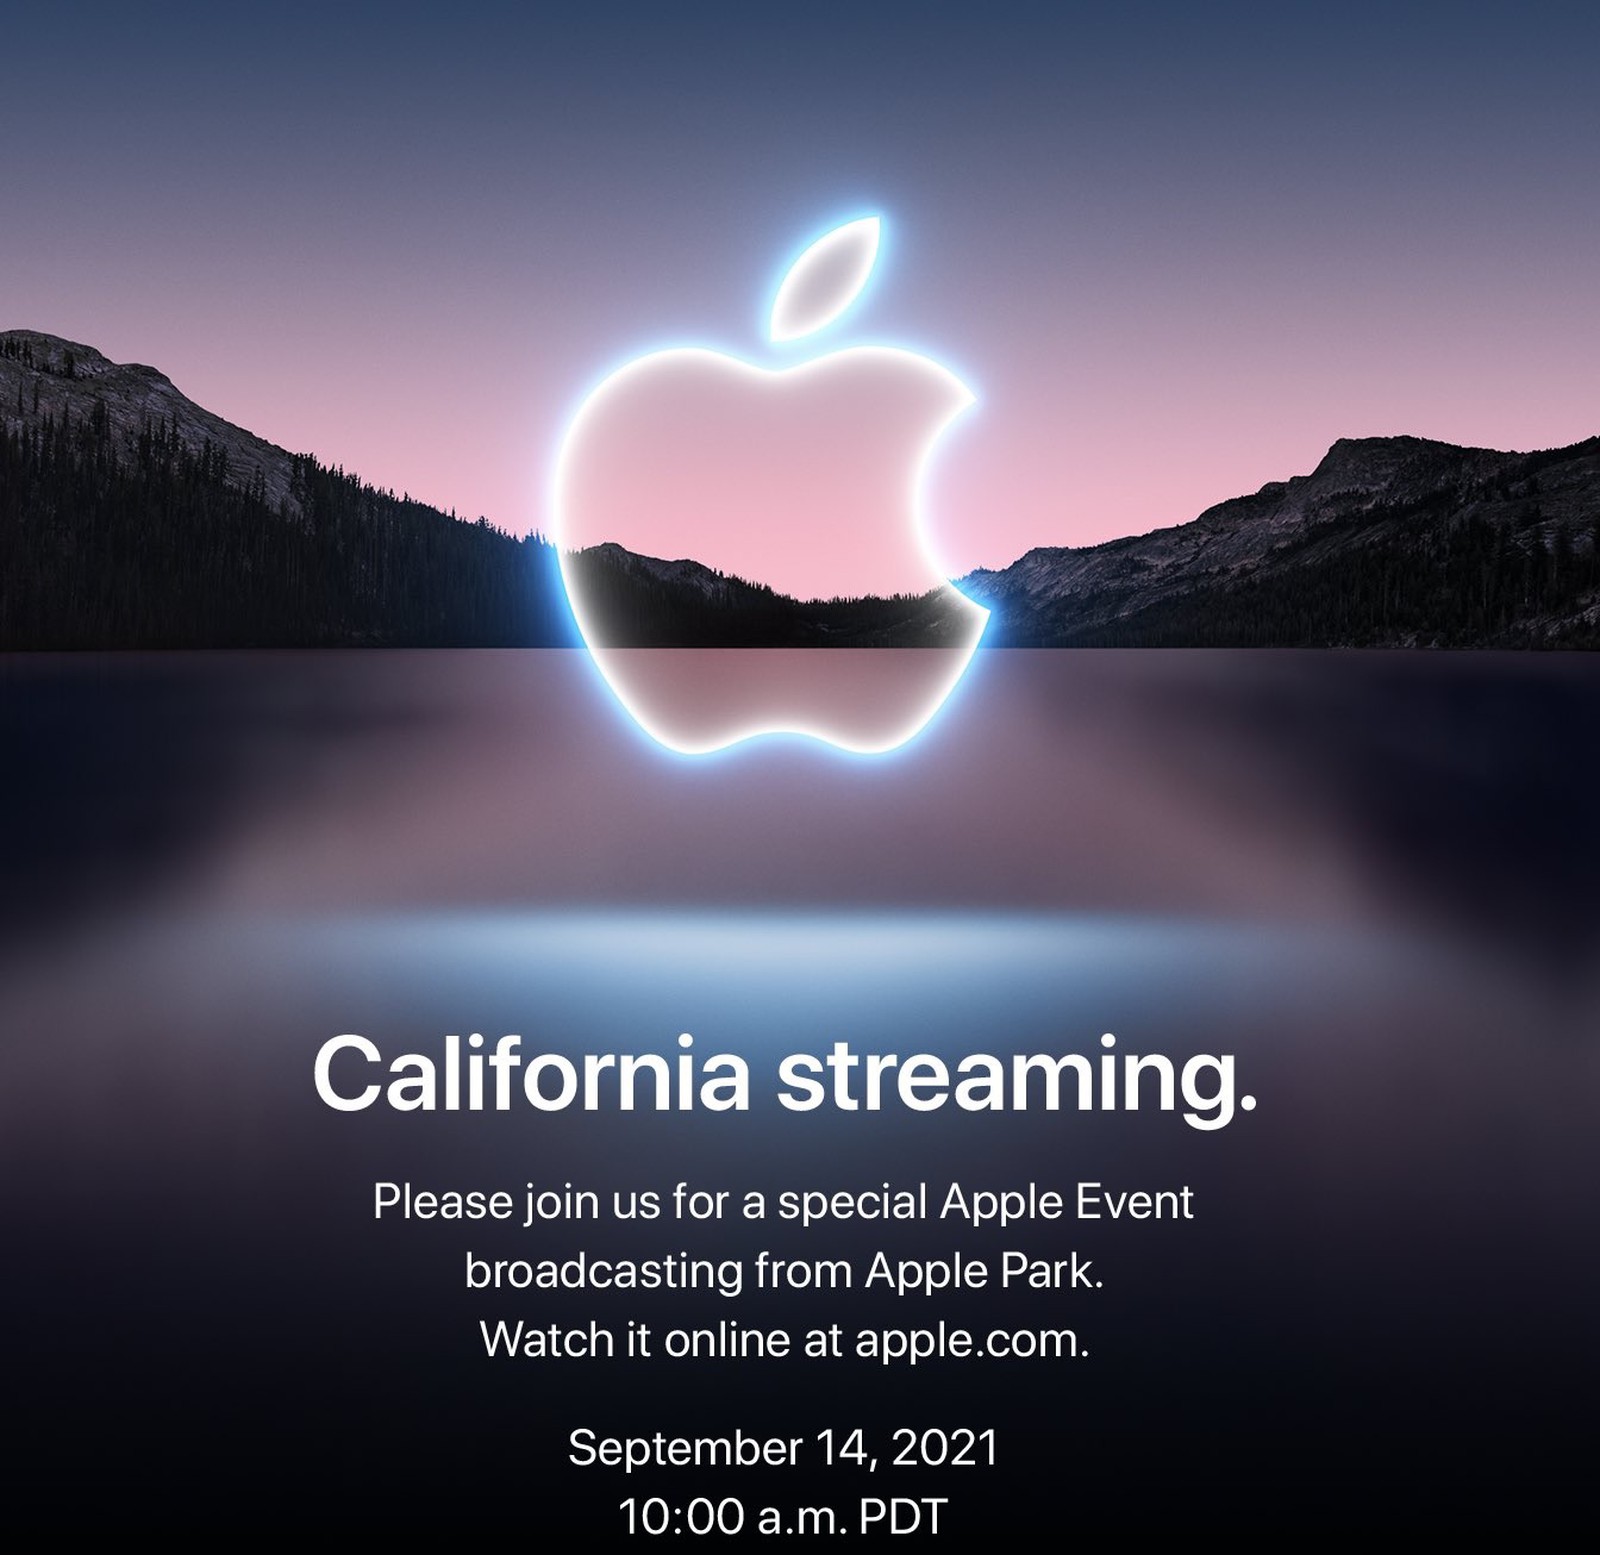 Apple Event Announced California Streaming On September 14 With IPhone